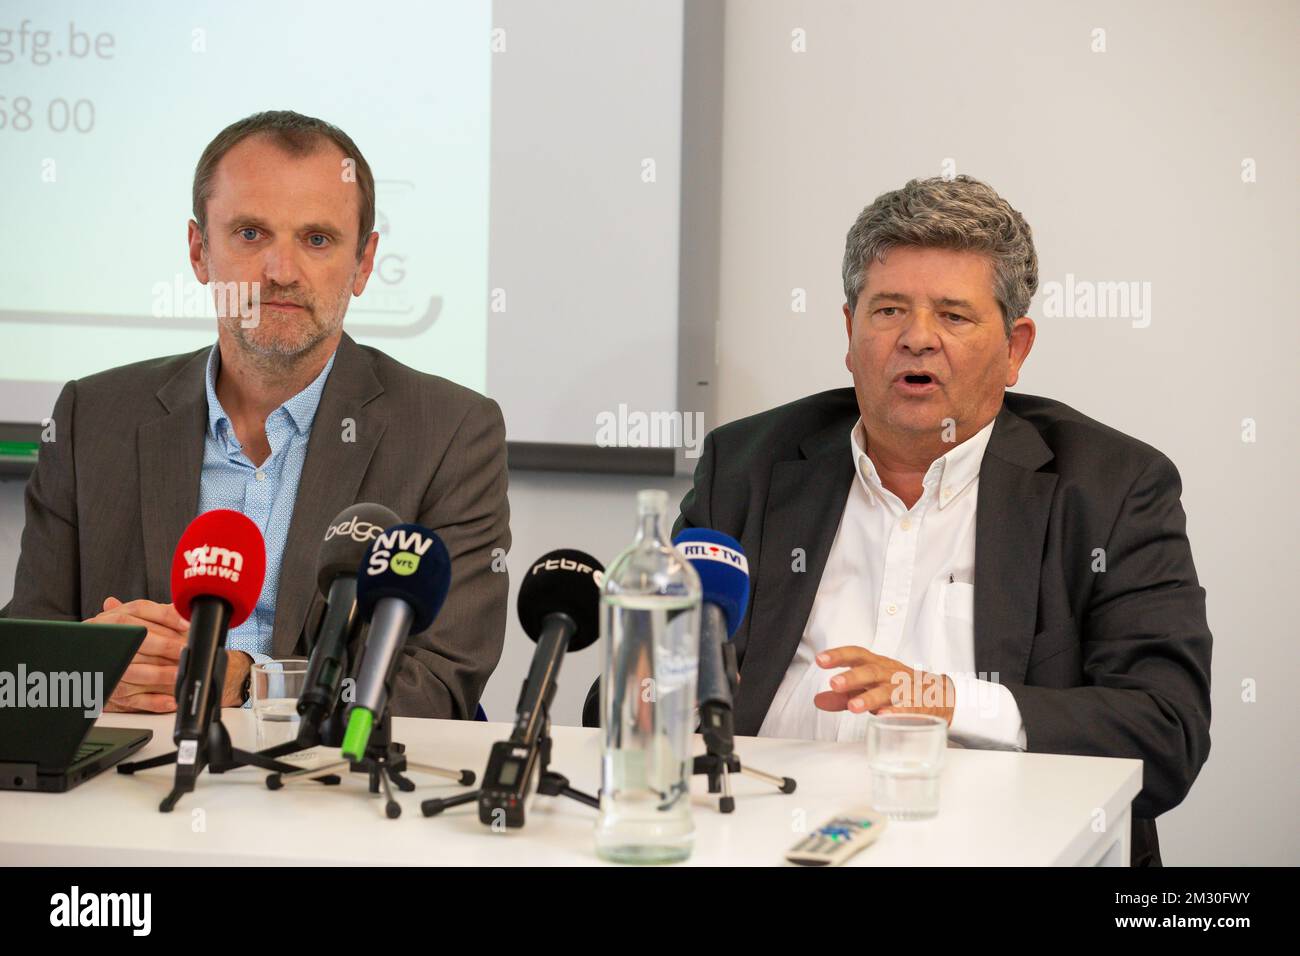 Travel Fund general manager Mark De Vriendt and Jean Philippe Cuvelier  pictured during a press conference of the Travel Guarantee Fund (GFG -  Garantiefonds Reizen Fonds de Garantie Voyages), after the announcement